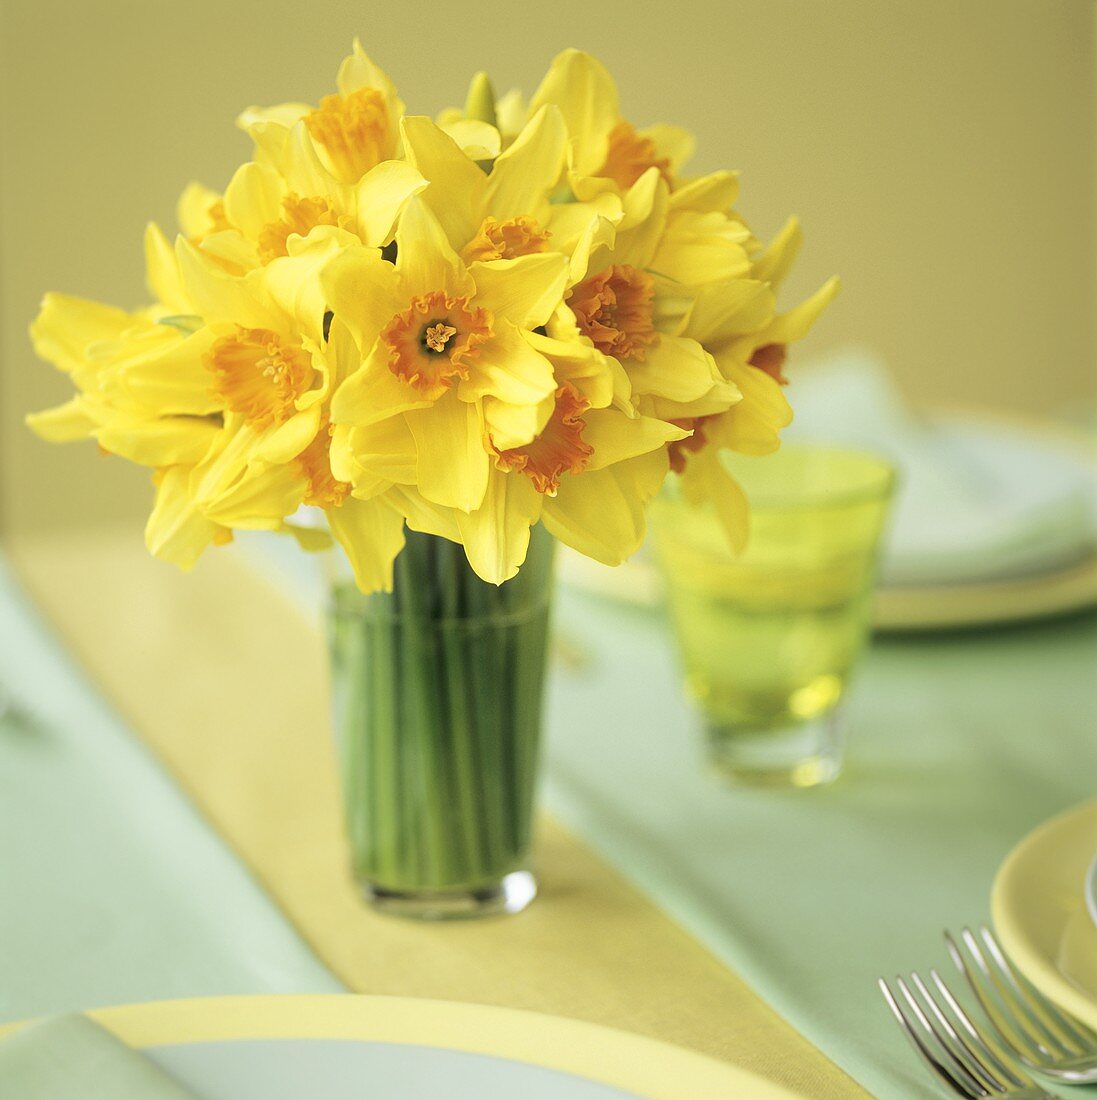 A bouquet of yellow daffodils